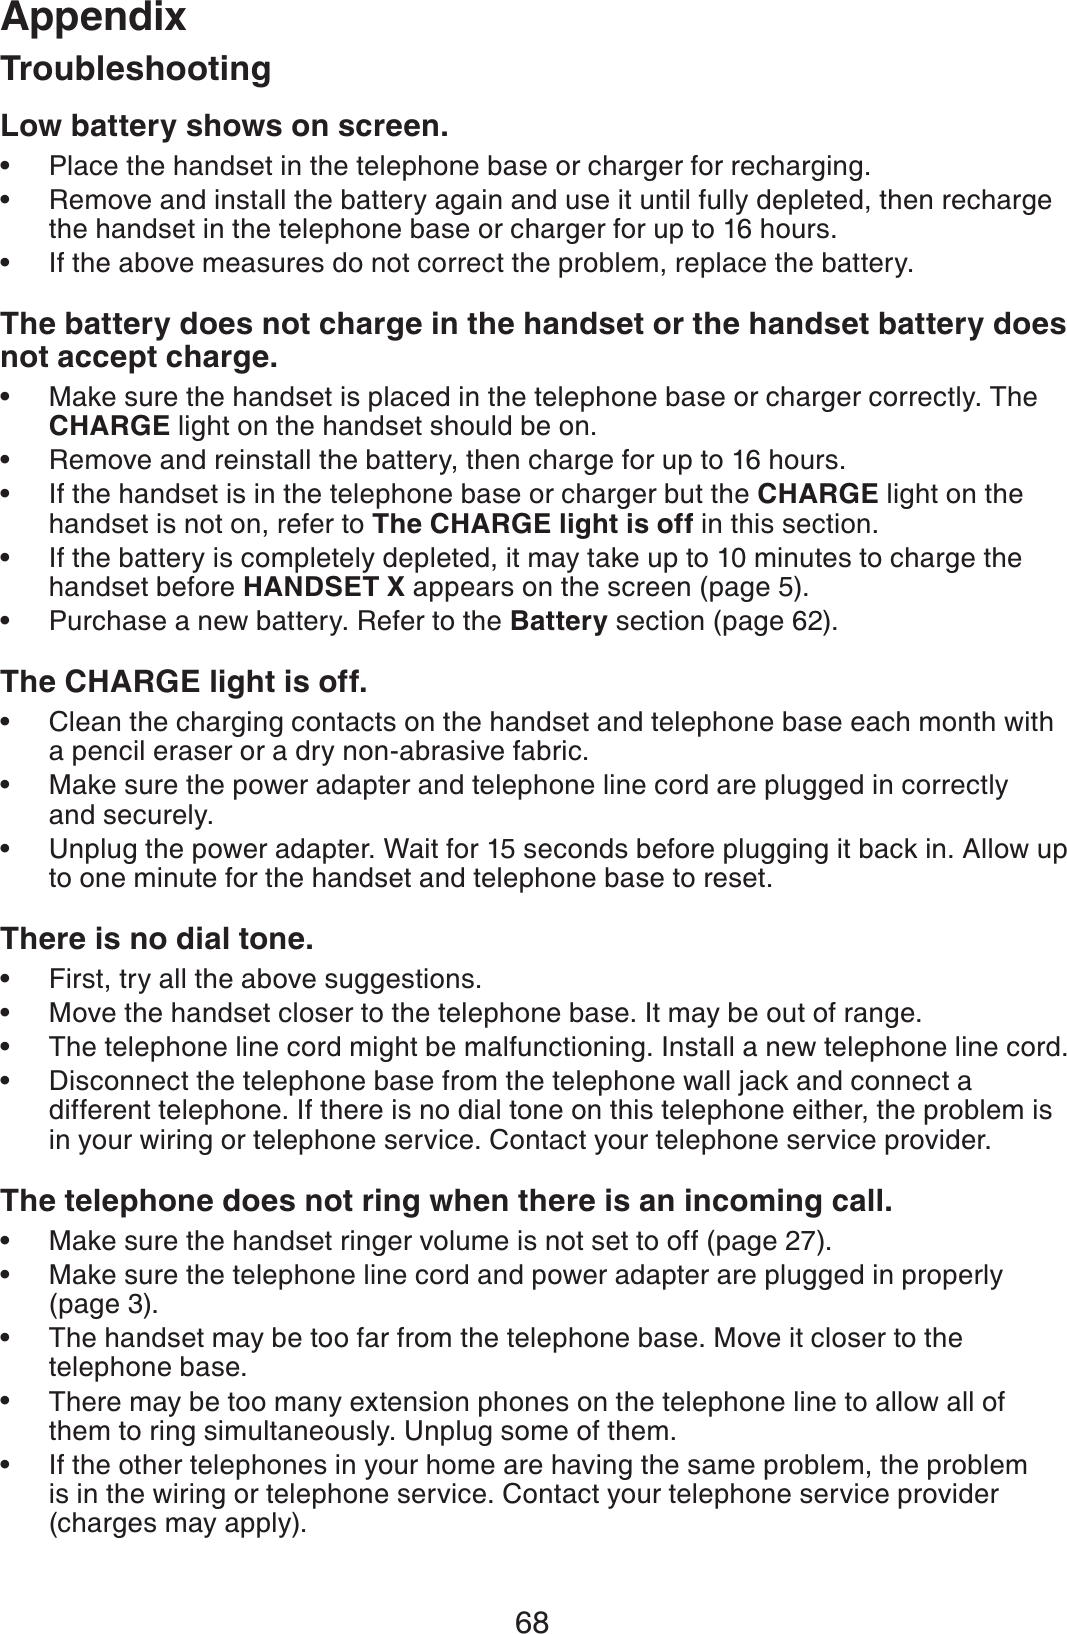 68AppendixLow battery shows on screen.Place the handset in the telephone base or charger for recharging.Remove and install the battery again and use it until fully depleted, then recharge the handset in the telephone base or charger for up to 16 hours.If the above measures do not correct the problem, replace the battery.The battery does not charge in the handset or the handset battery does not accept charge.Make sure the handset is placed in the telephone base or charger correctly. The CHARGE light on the handset should be on.Remove and reinstall the battery, then charge for up to 16 hours.If the handset is in the telephone base or charger but the CHARGE light on the handset is not on, refer to The CHARGE light is off in this section.If the battery is completely depleted, it may take up to 10 minutes to charge the handset before HANDSET X appears on the screen (page 5).Purchase a new battery. Refer to the Battery section (page 62).The CHARGE light is off.Clean the charging contacts on the handset and telephone base each month with a pencil eraser or a dry non-abrasive fabric.Make sure the power adapter and telephone line cord are plugged in correctly and securely.Unplug the power adapter. Wait for 15 seconds before plugging it back in. Allow up to one minute for the handset and telephone base to reset.There is no dial tone.First, try all the above suggestions.Move the handset closer to the telephone base. It may be out of range.The telephone line cord might be malfunctioning. Install a new telephone line cord.Disconnect the telephone base from the telephone wall jack and connect a different telephone. If there is no dial tone on this telephone either, the problem is in your wiring or telephone service. Contact your telephone service provider.The telephone does not ring when there is an incoming call.Make sure the handset ringer volume is not set to off (page 27). Make sure the telephone line cord and power adapter are plugged in properly (page 3).The handset may be too far from the telephone base. Move it closer to the telephone base.There may be too many extension phones on the telephone line to allow all of them to ring simultaneously. Unplug some of them.If the other telephones in your home are having the same problem, the problem is in the wiring or telephone service. Contact your telephone service provider (charges may apply).••••••••••••••••••••Troubleshooting